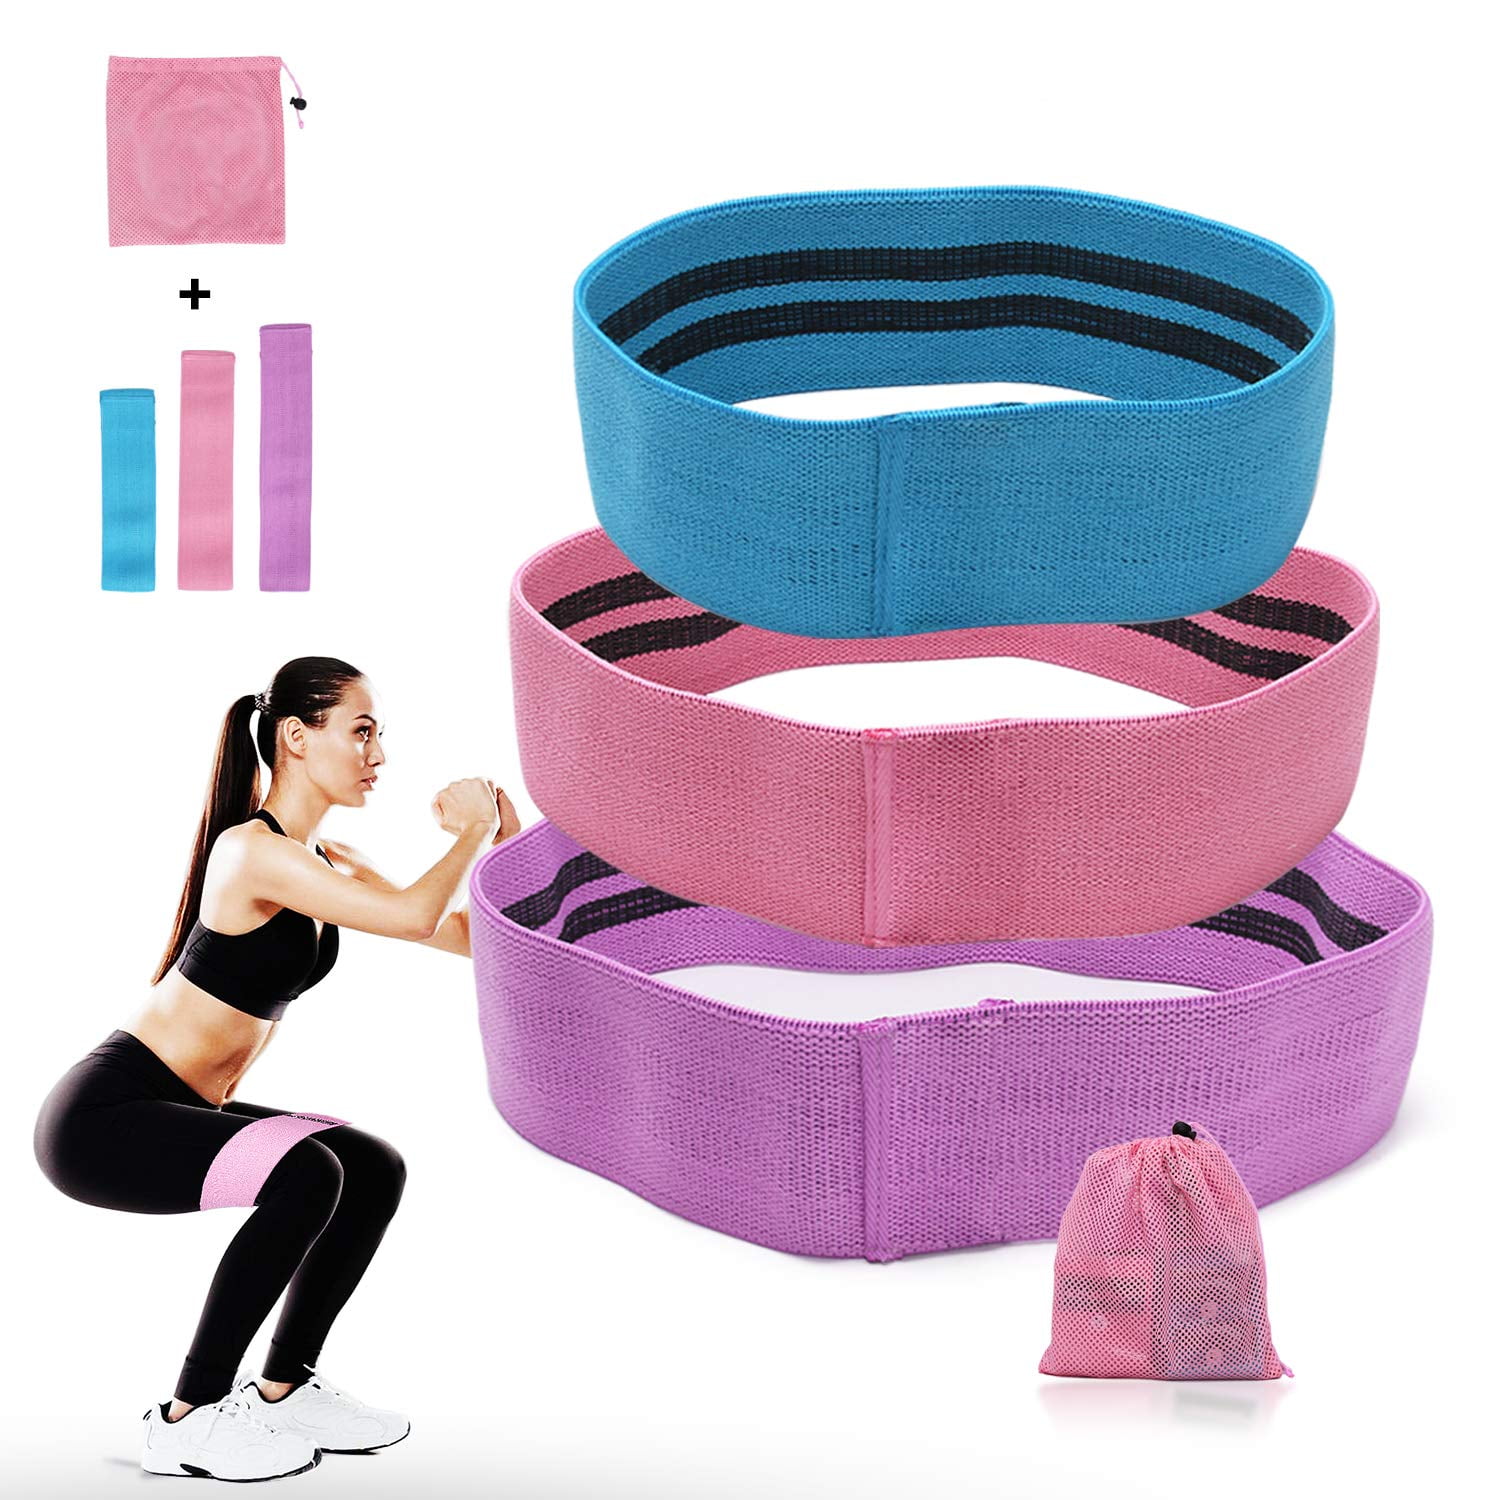 RESISTANCE BANDS PINK EXERCISE MINI LOOP YOGA HOME GYM BOOTY GLUTES PILATES ABS 